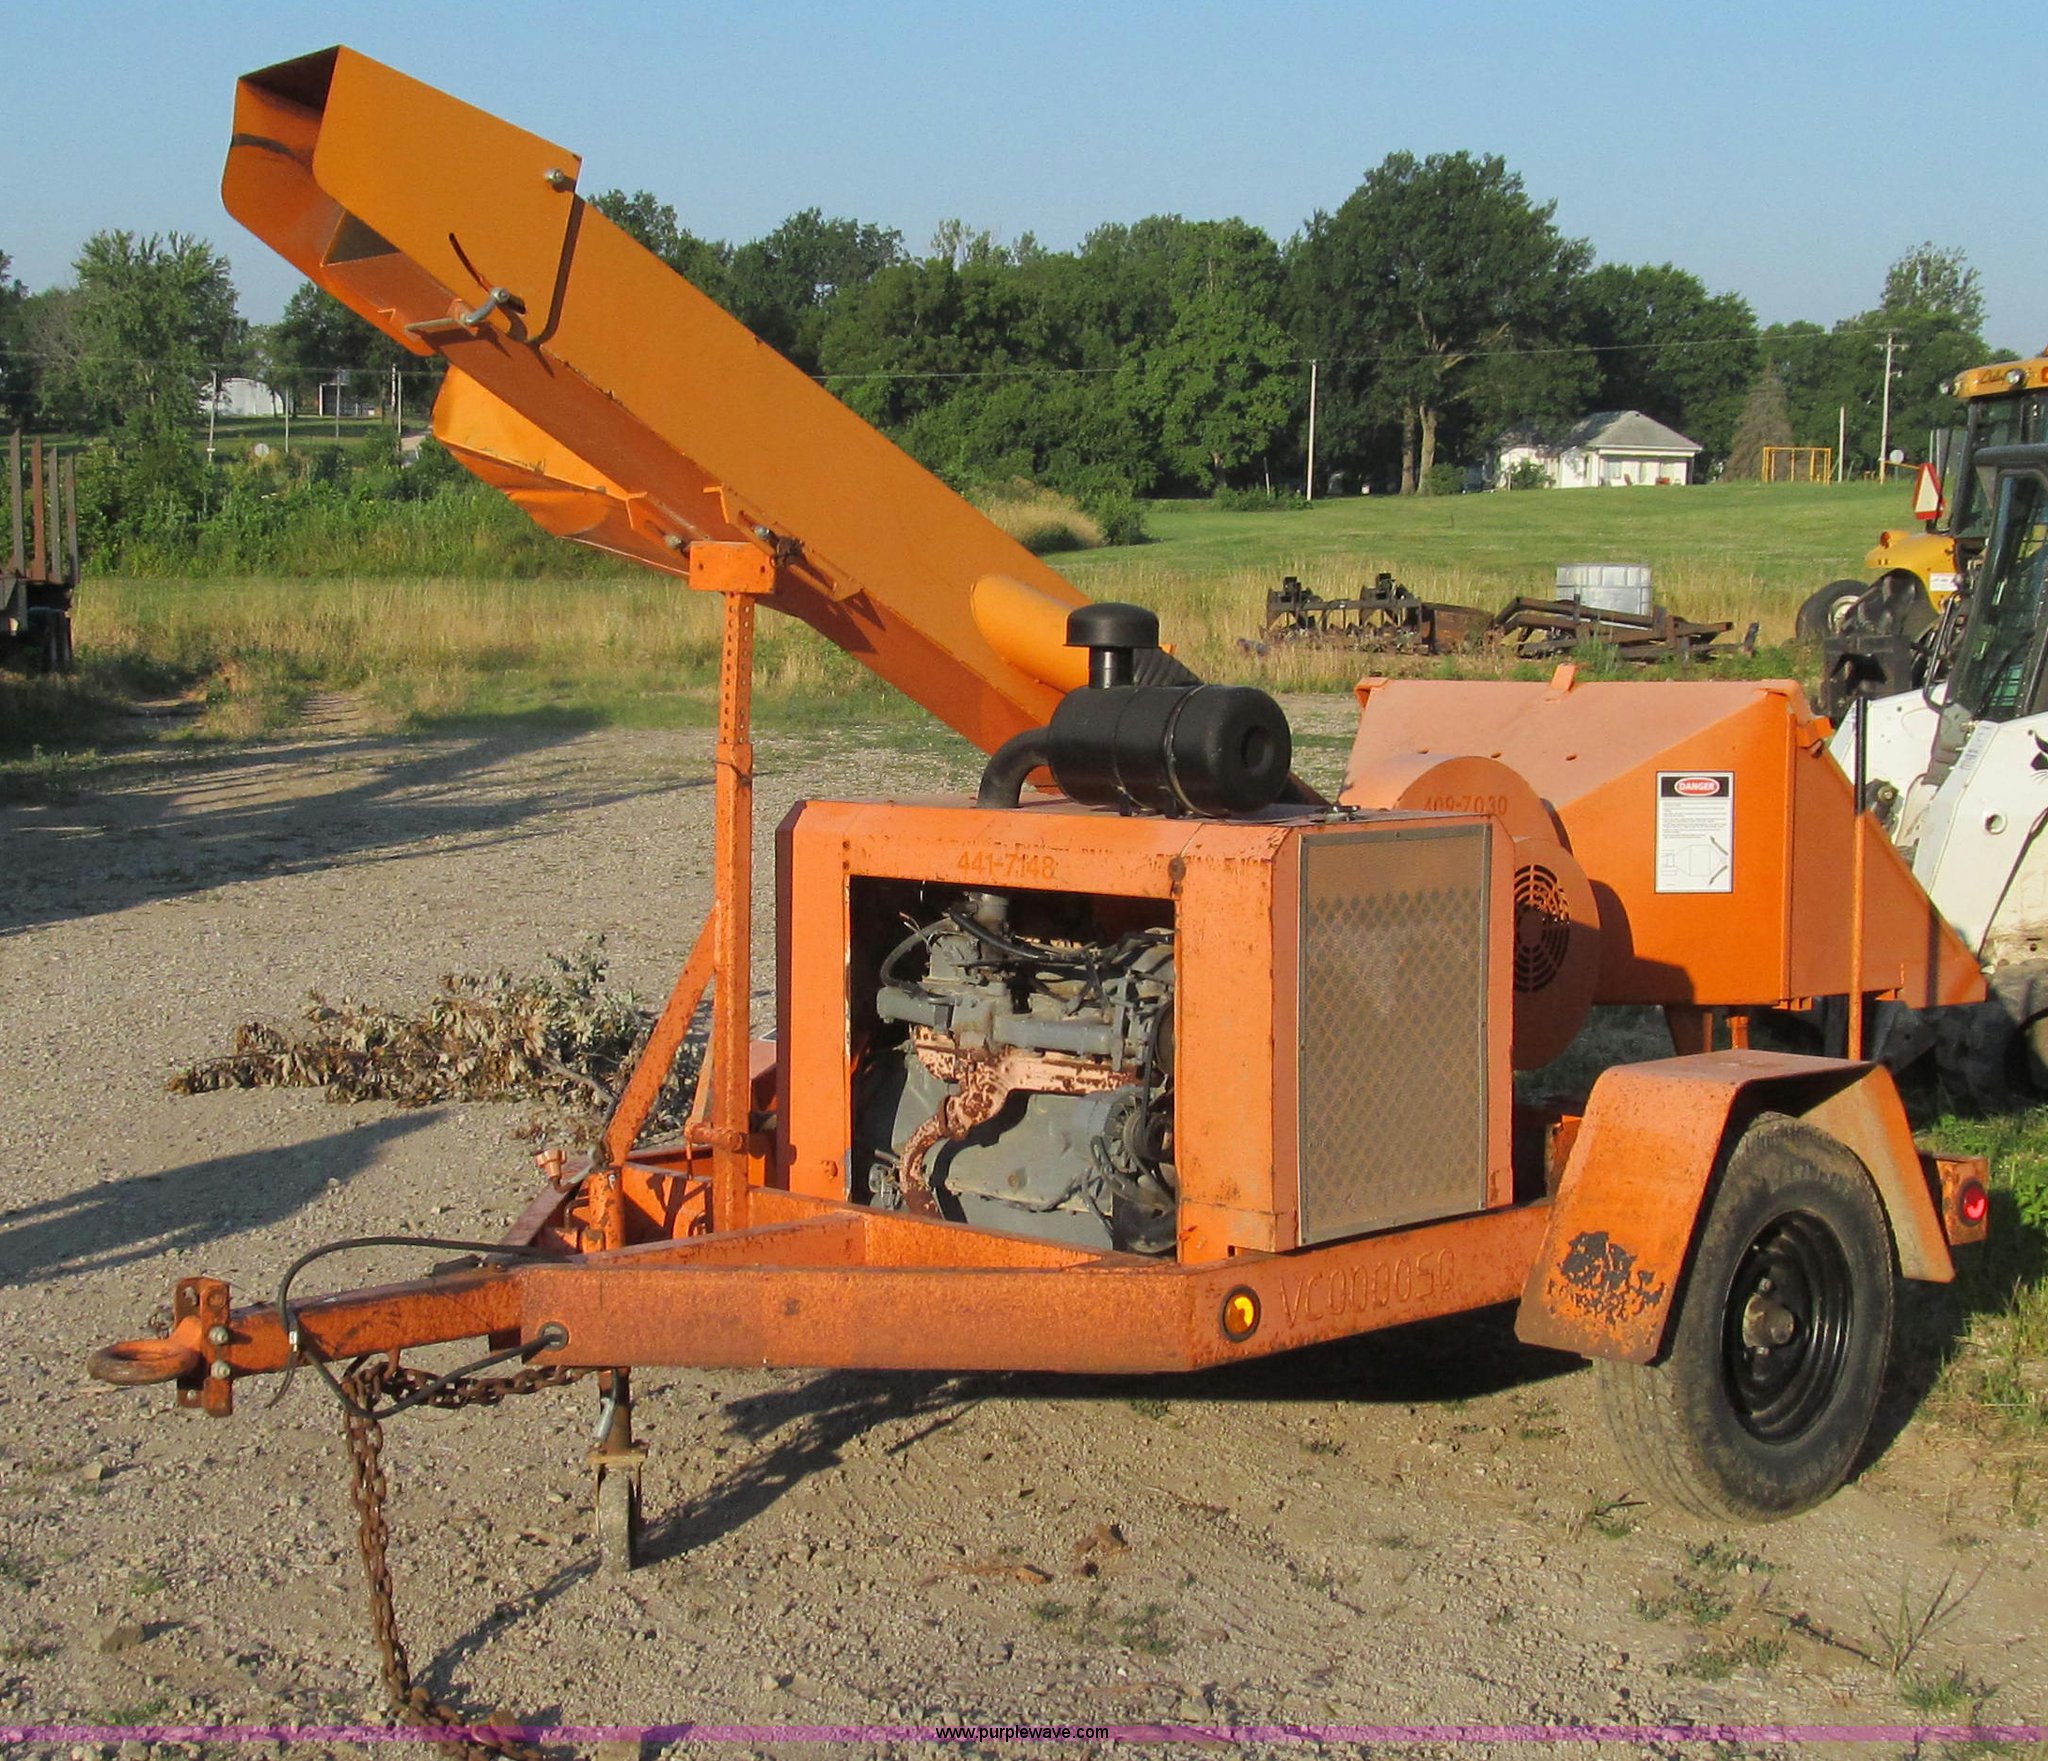 Used Wood Chipper For Sale In Missouri